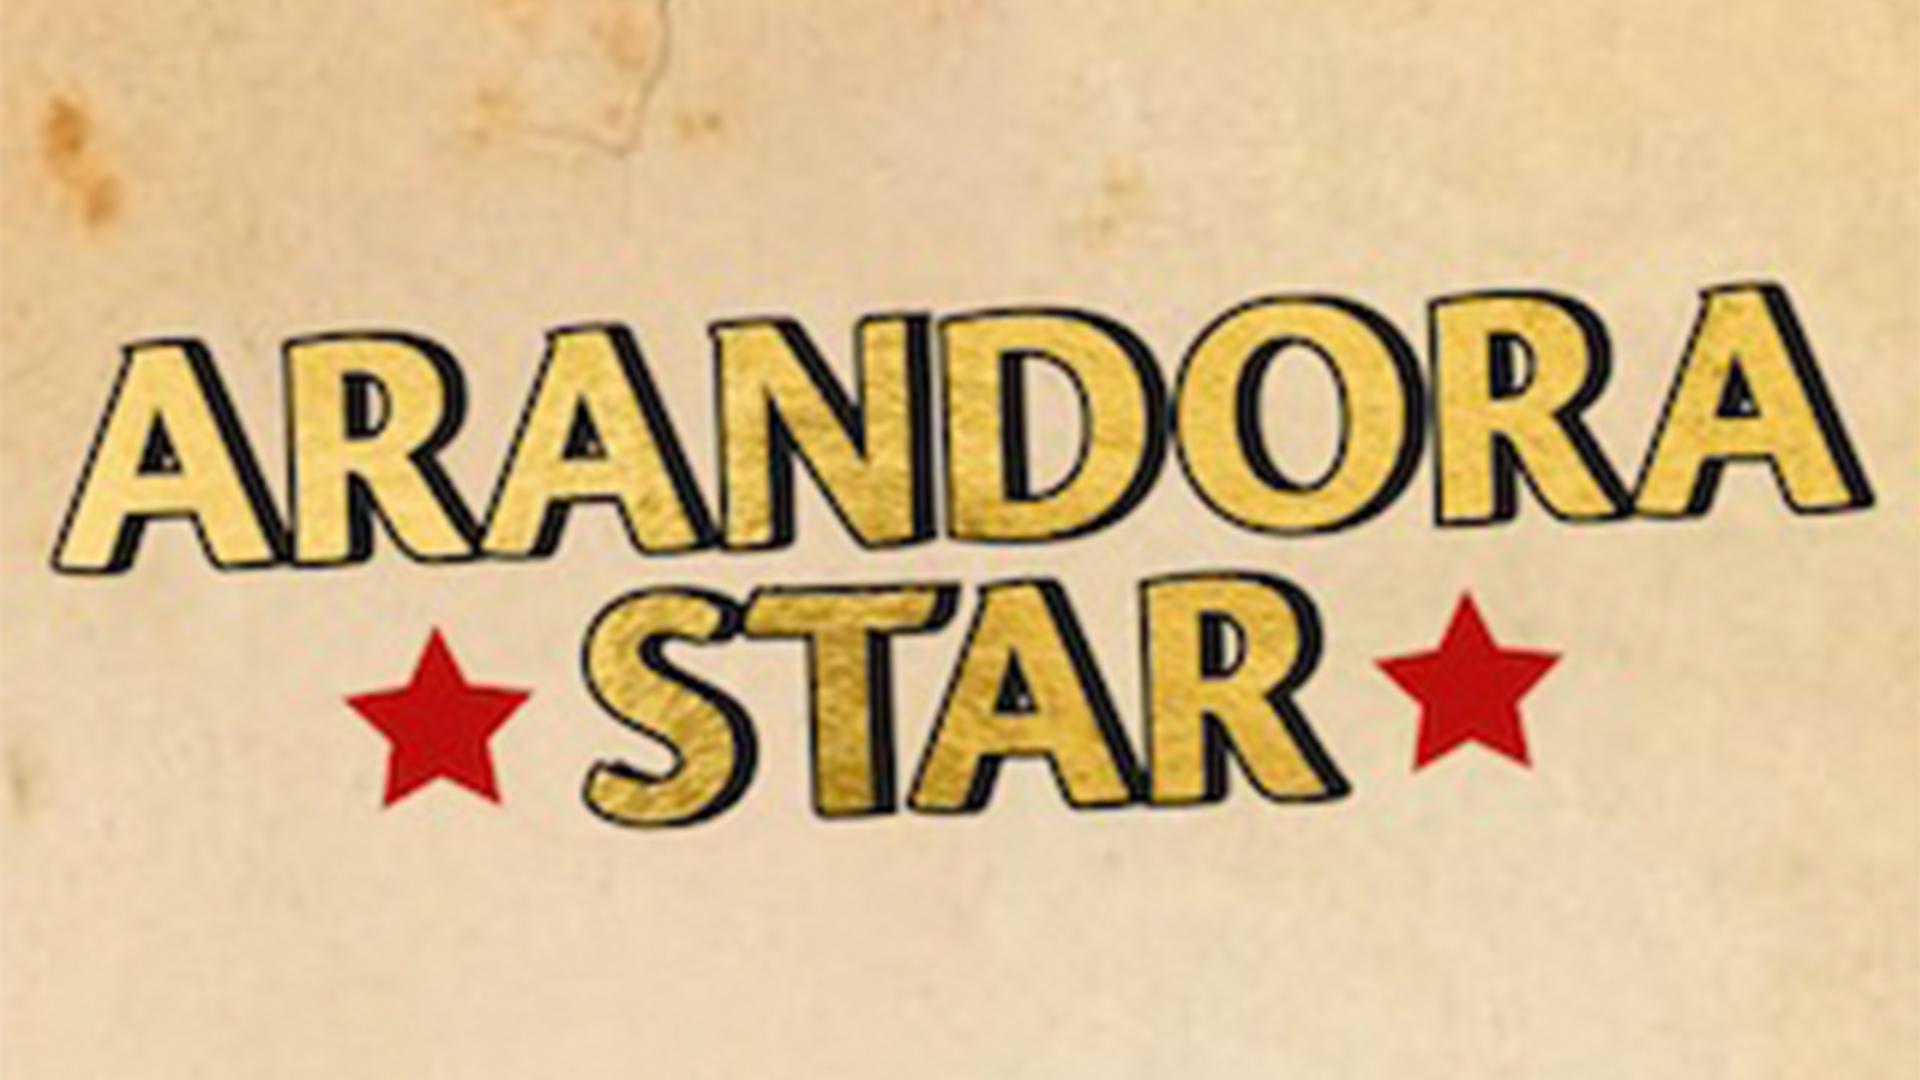 The words Arandora Star with two stars